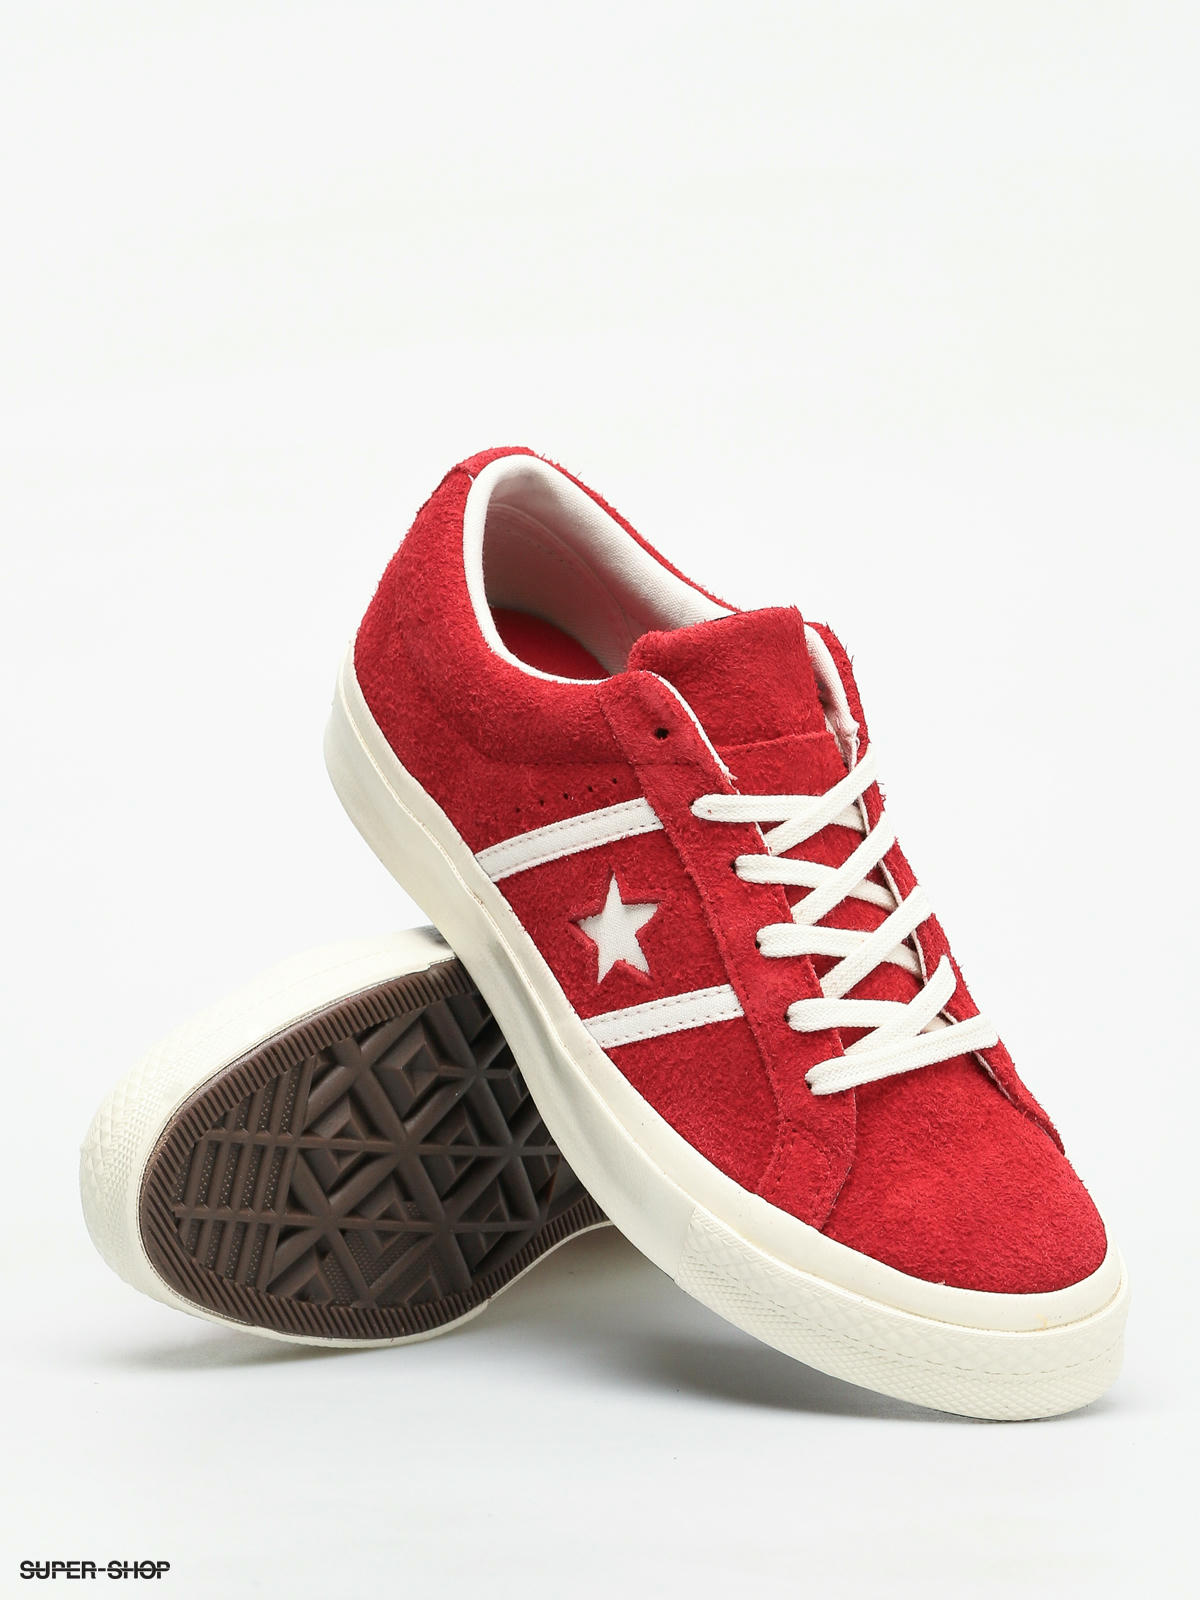 converse one star academy red